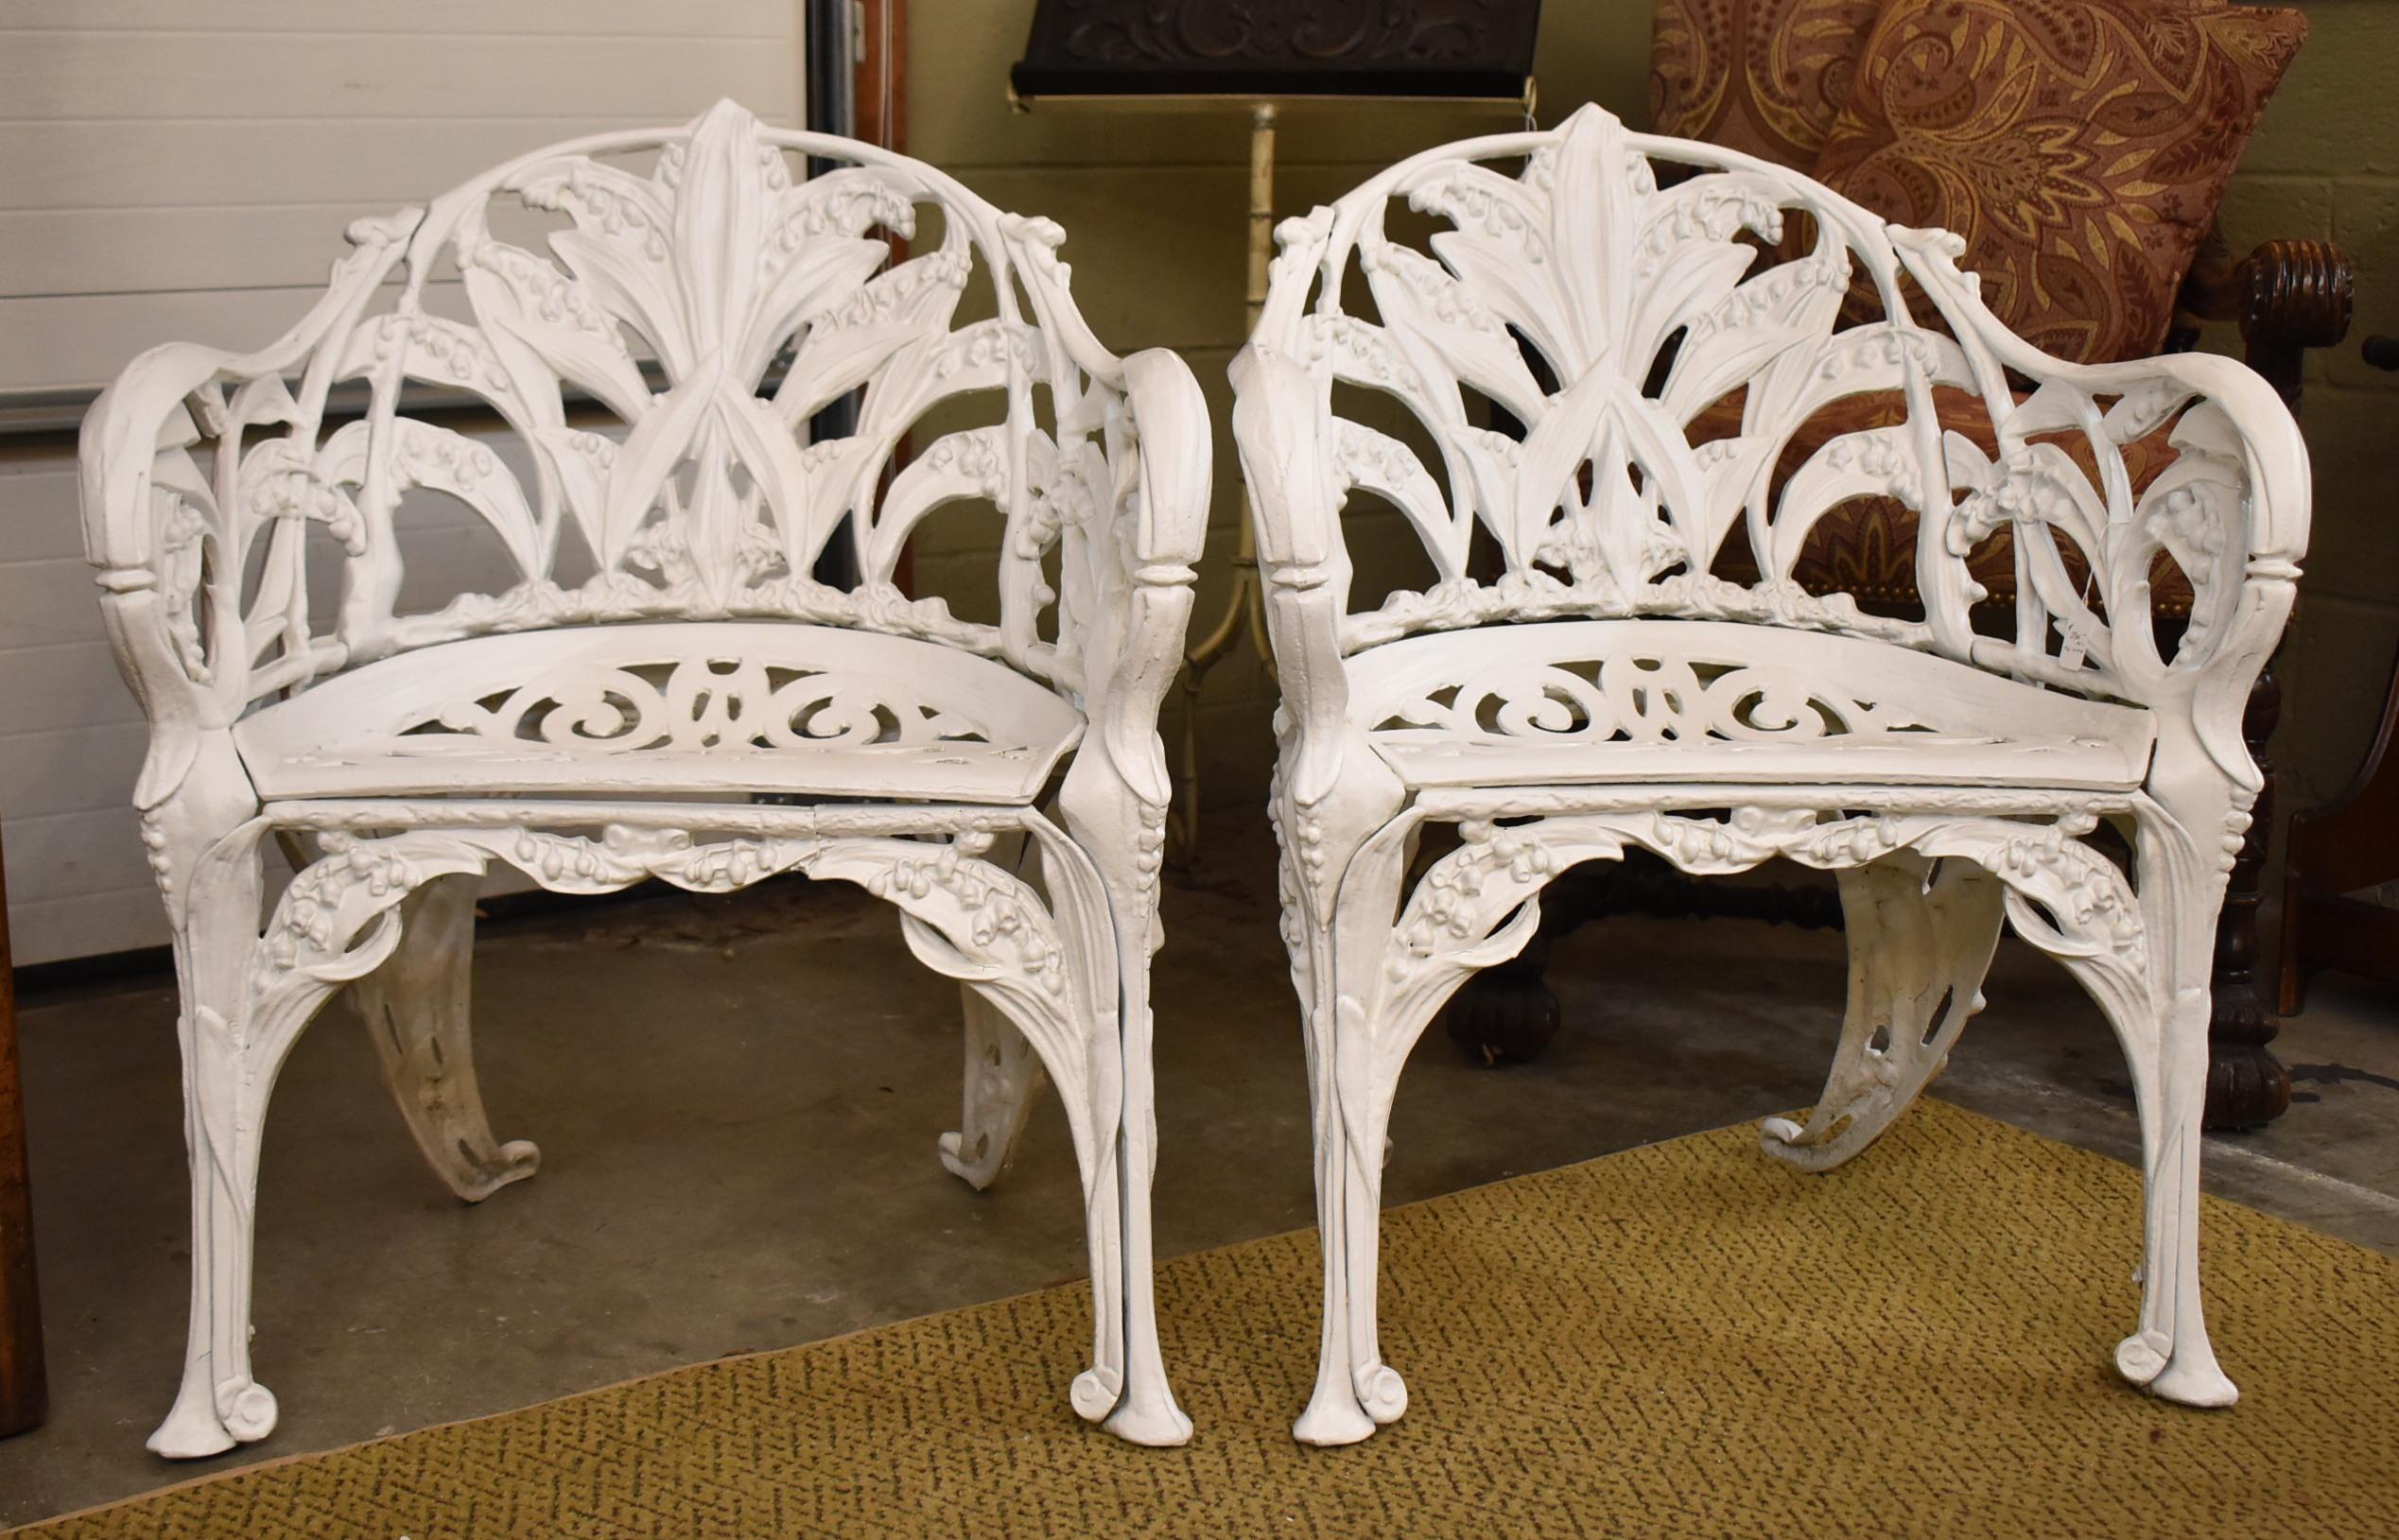 Pair iron Lily of the Valley white garden chairs. Very nice condition. Not sure if finish is original. Dimensions: 22